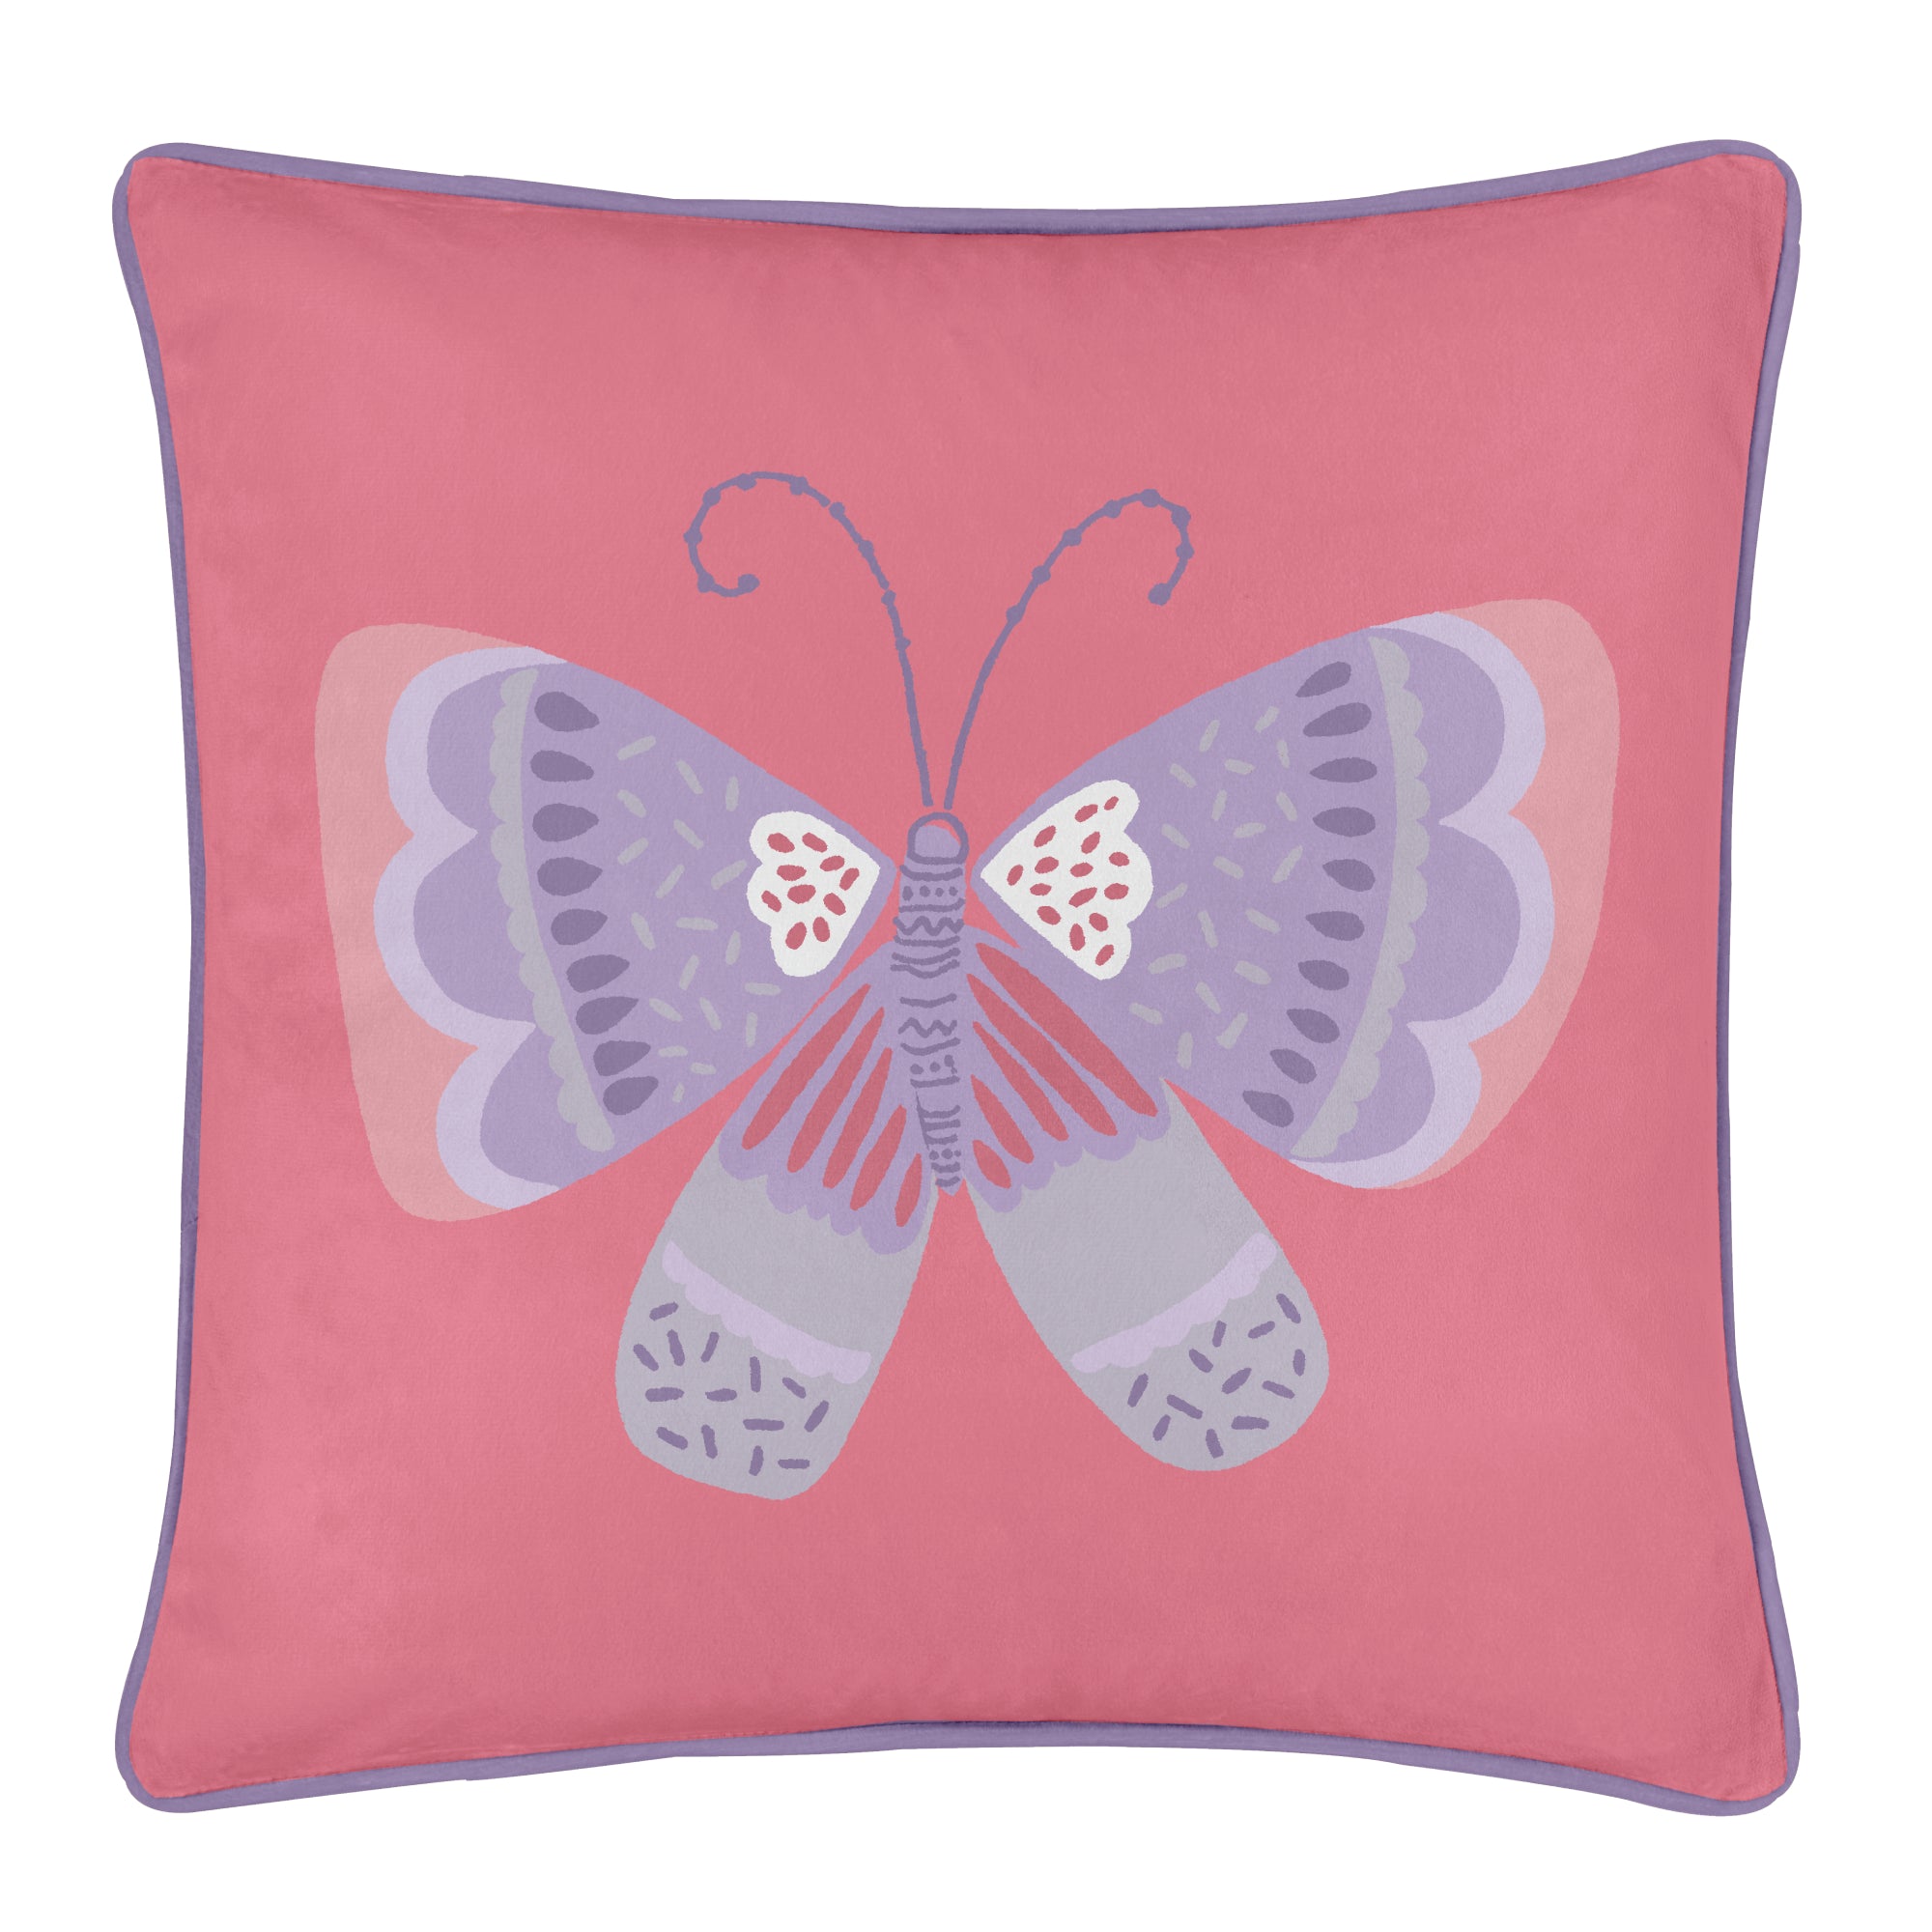 Filled Cushion Flutterby Butterfly by Bedlam in Pink